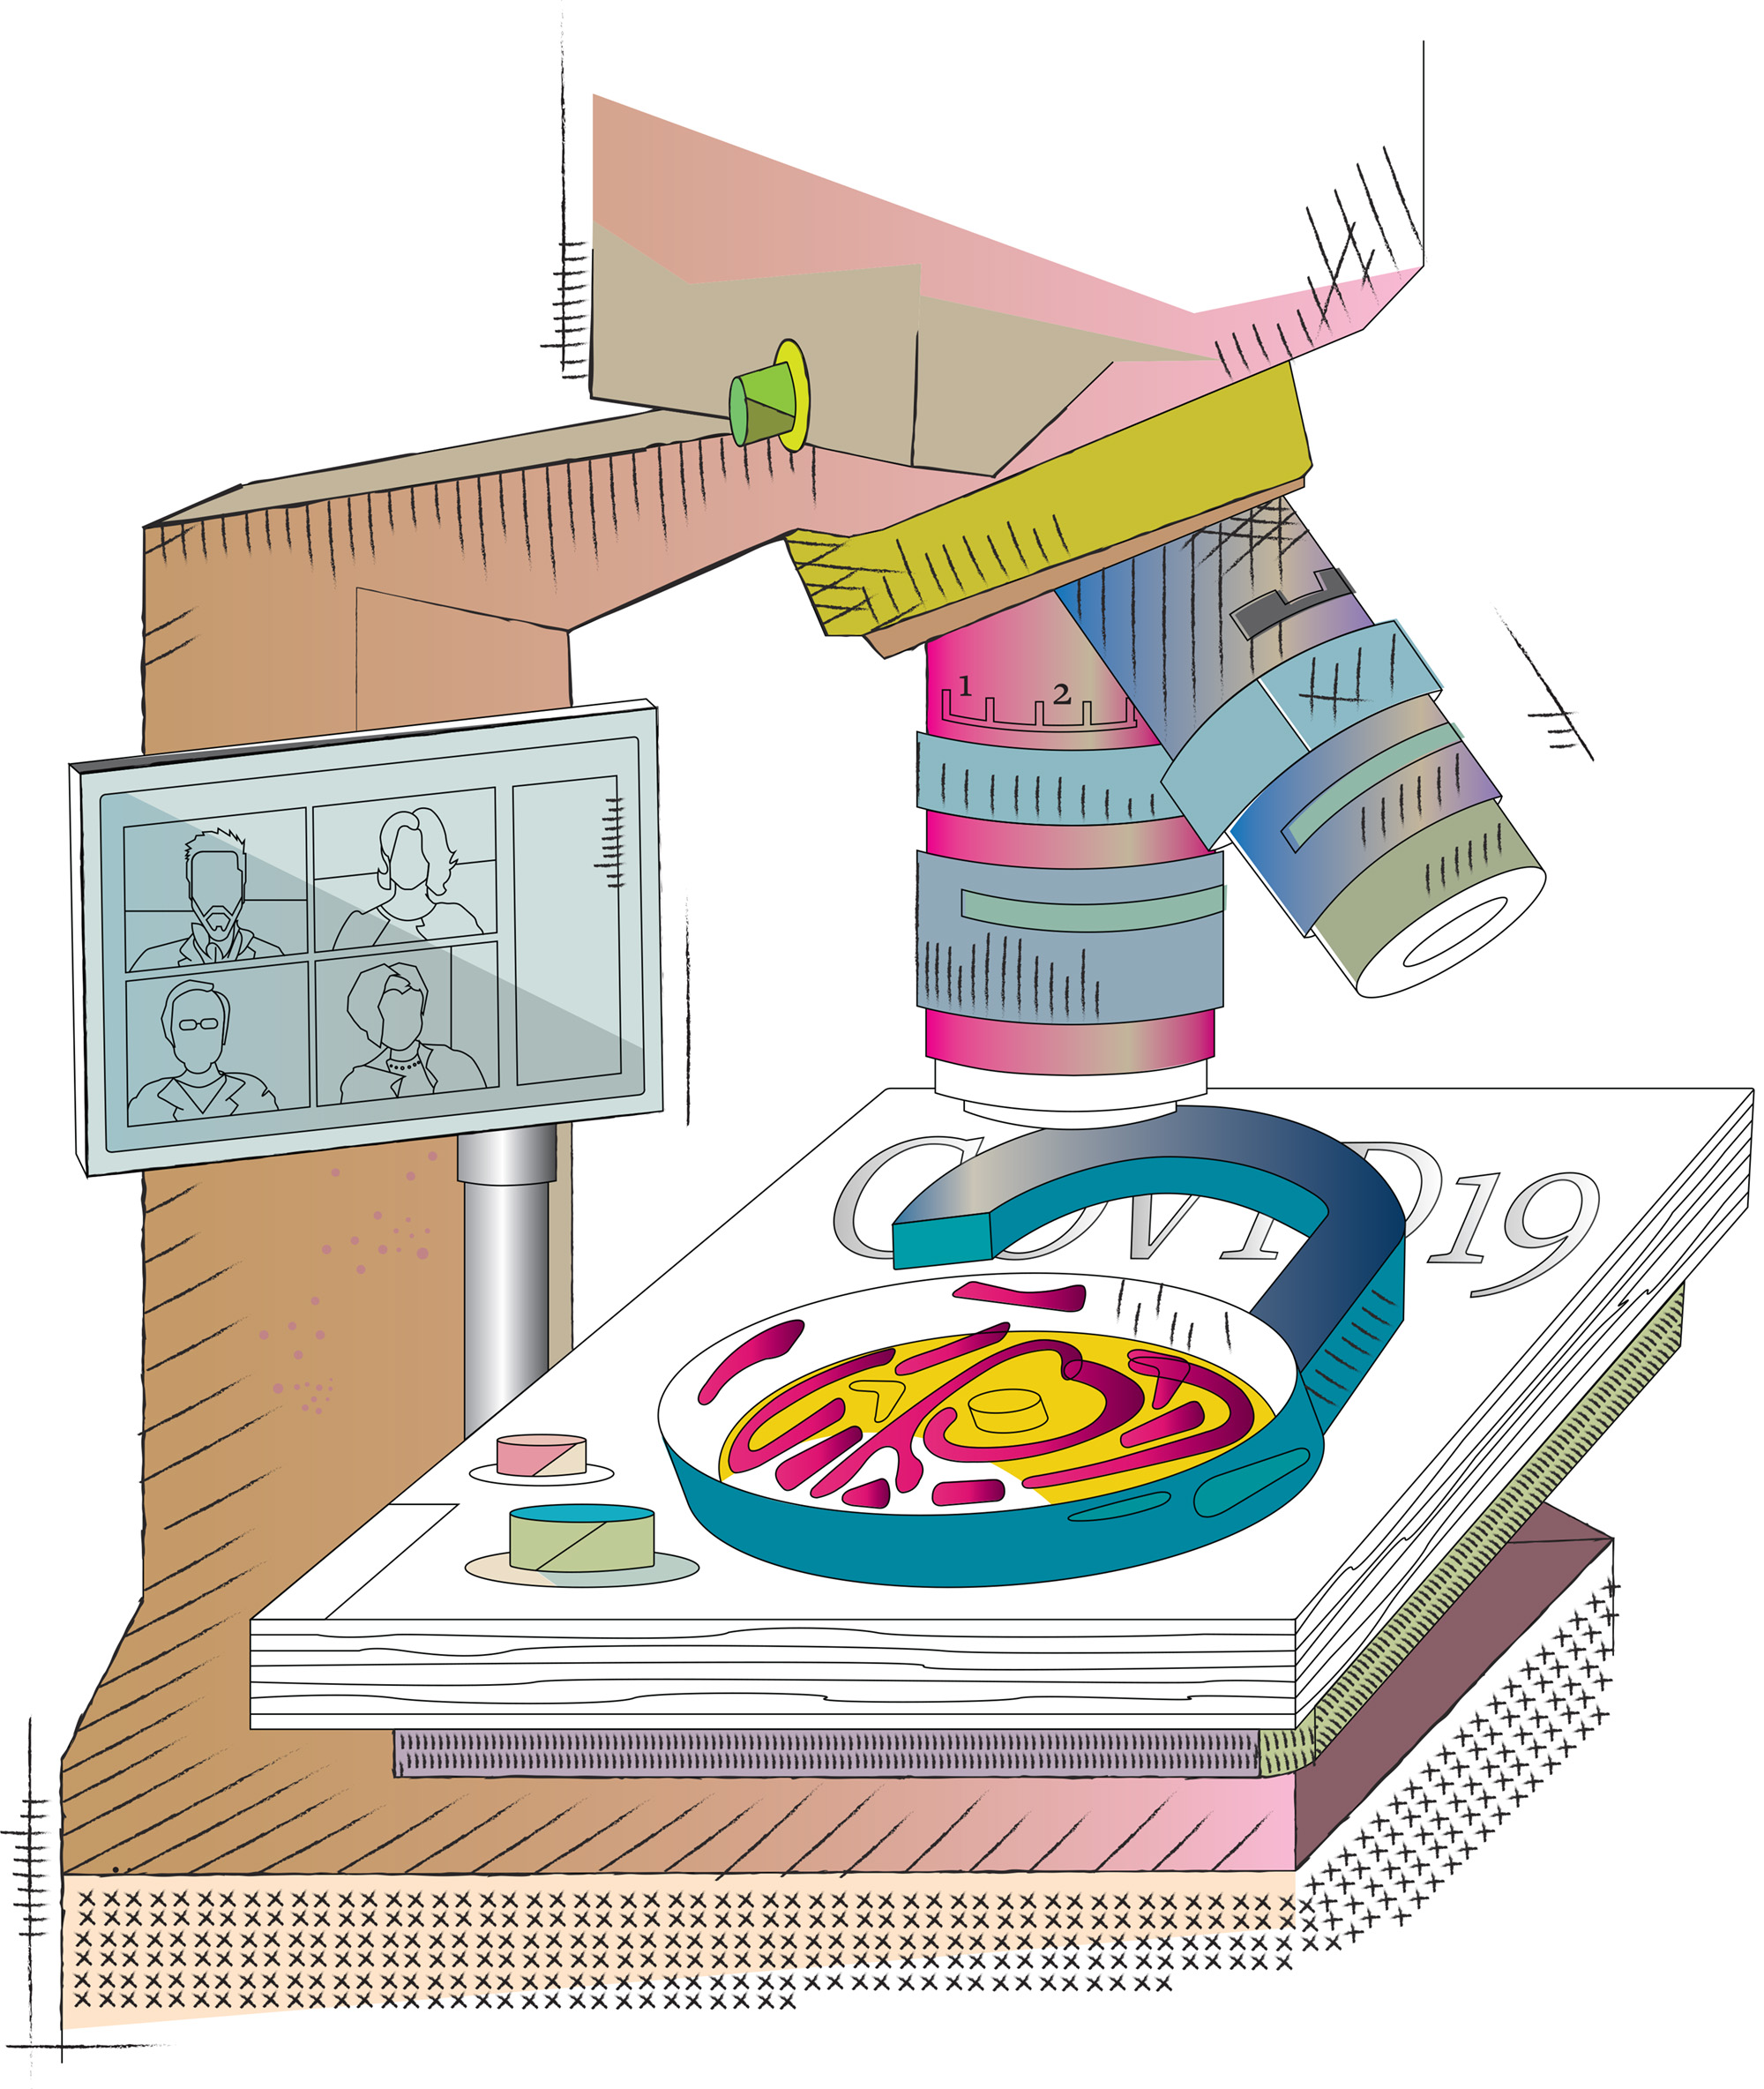 Illustration of microscope, dish with item and video conference image referencing people